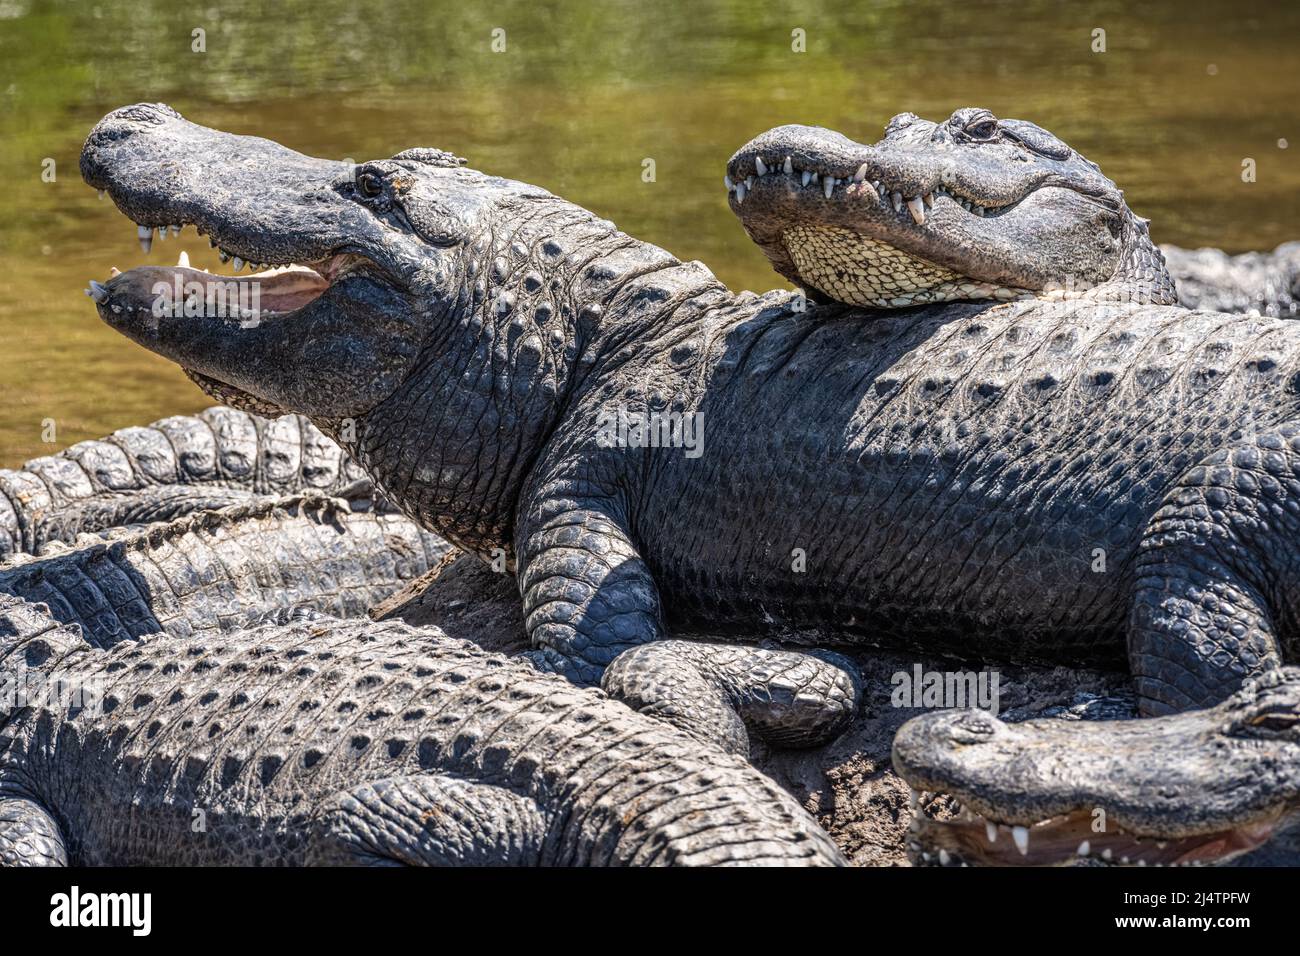 American alligators (Alligator mississippiensis) basking in the sun at St. Augustine Alligator Farm Zoological Park in St. Augustine, Florida. (USA) Stock Photo